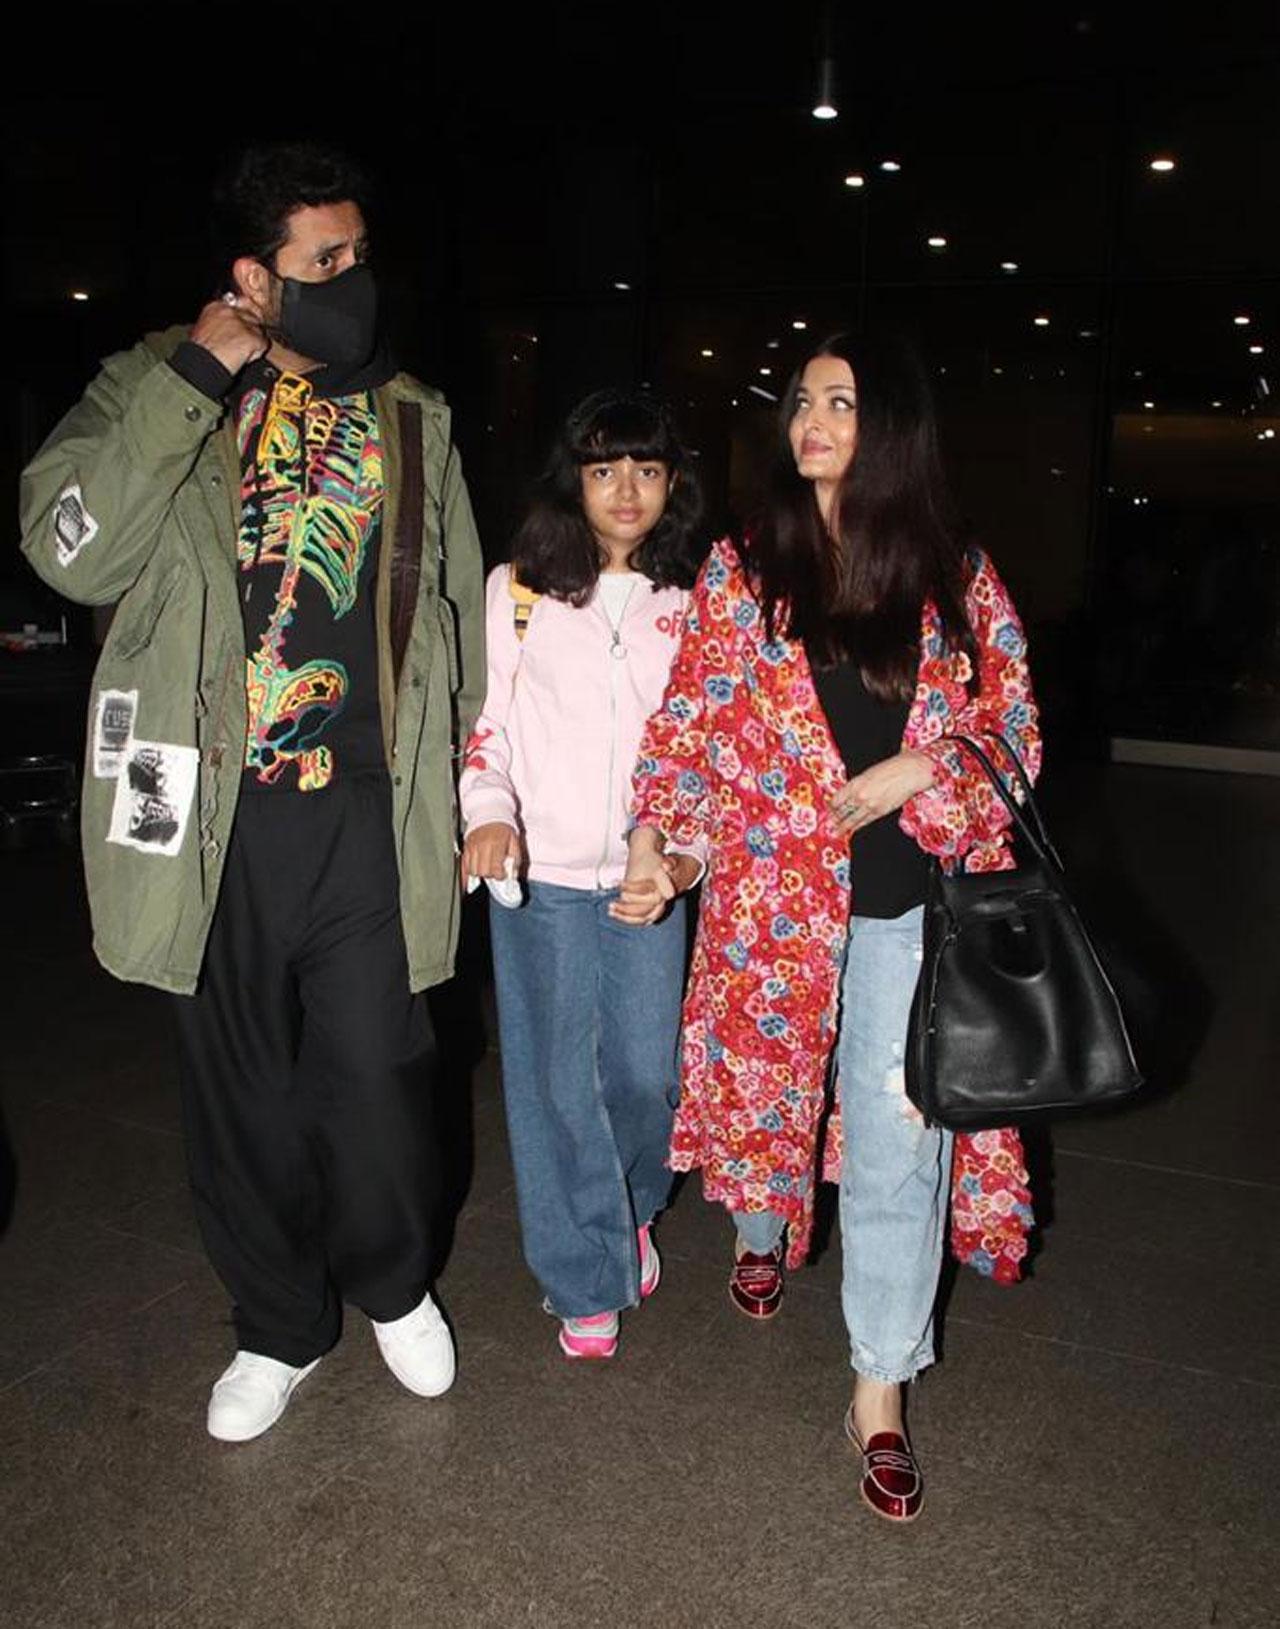 Aishwarya Rai Bachchan returned to Mumbai with Abhishek Bachchan and Aaradhya Bachchan after attending Cannes 2022. The actress was regular in sharing her looks and outfits with fans on Instagram at the festival she's now a veteran of.